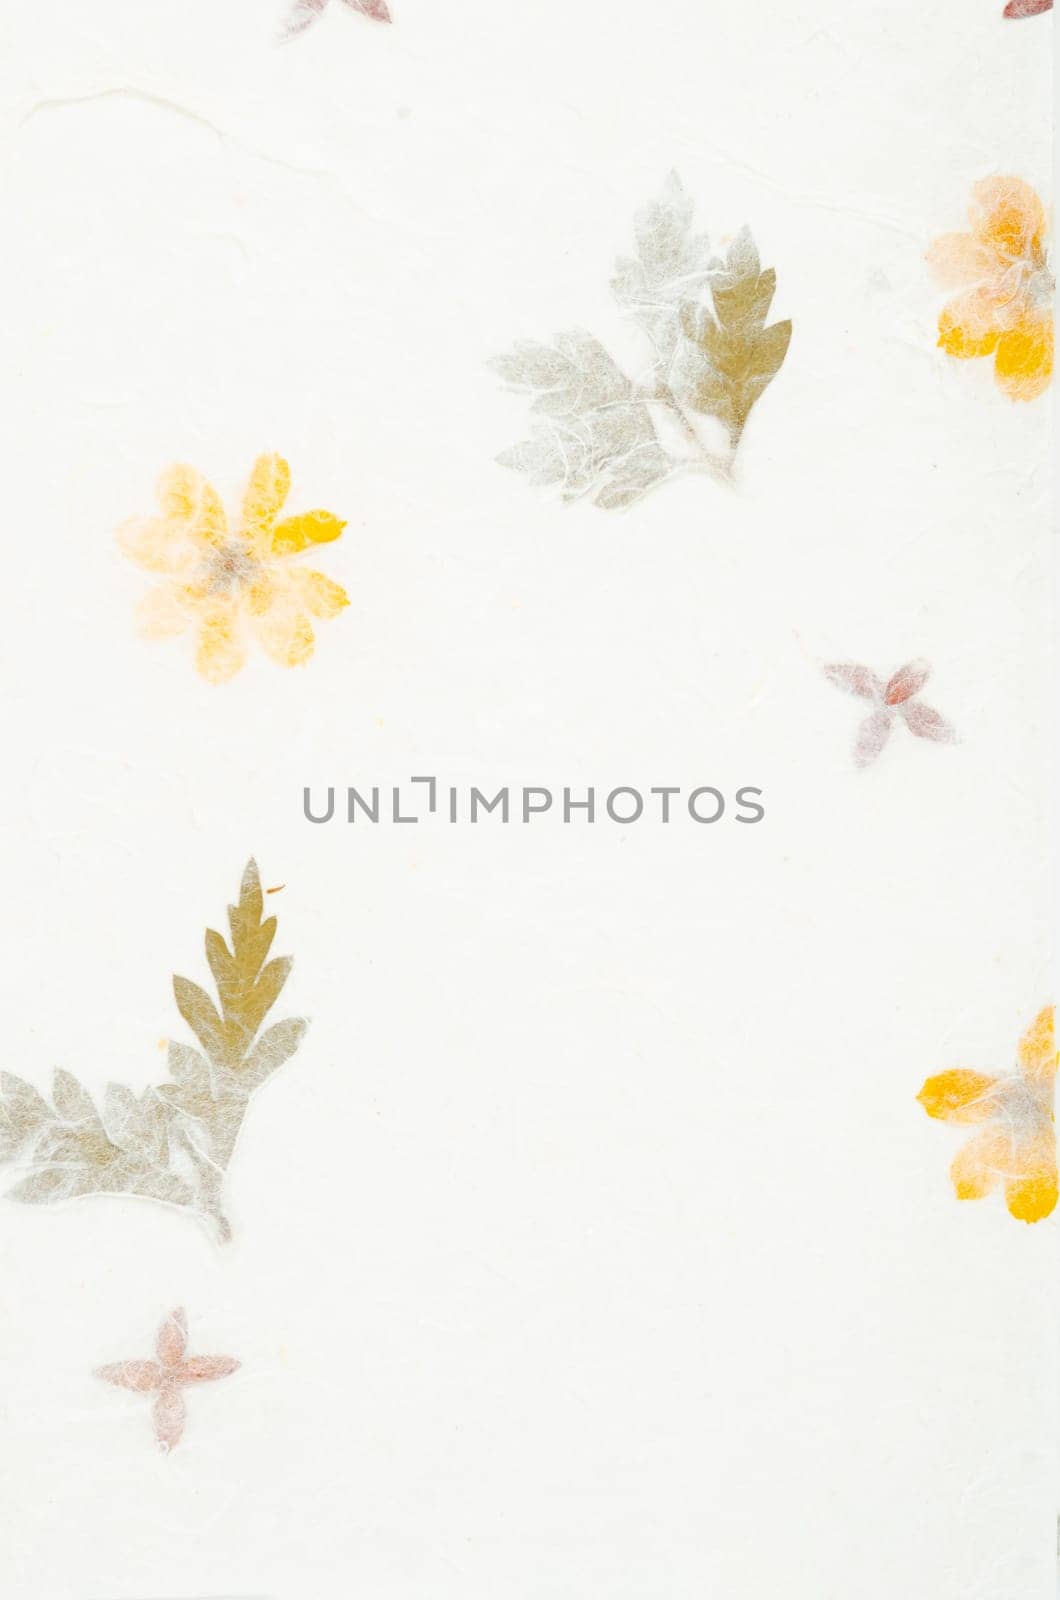 The Handmade recycled leaf paper background. by Gamjai